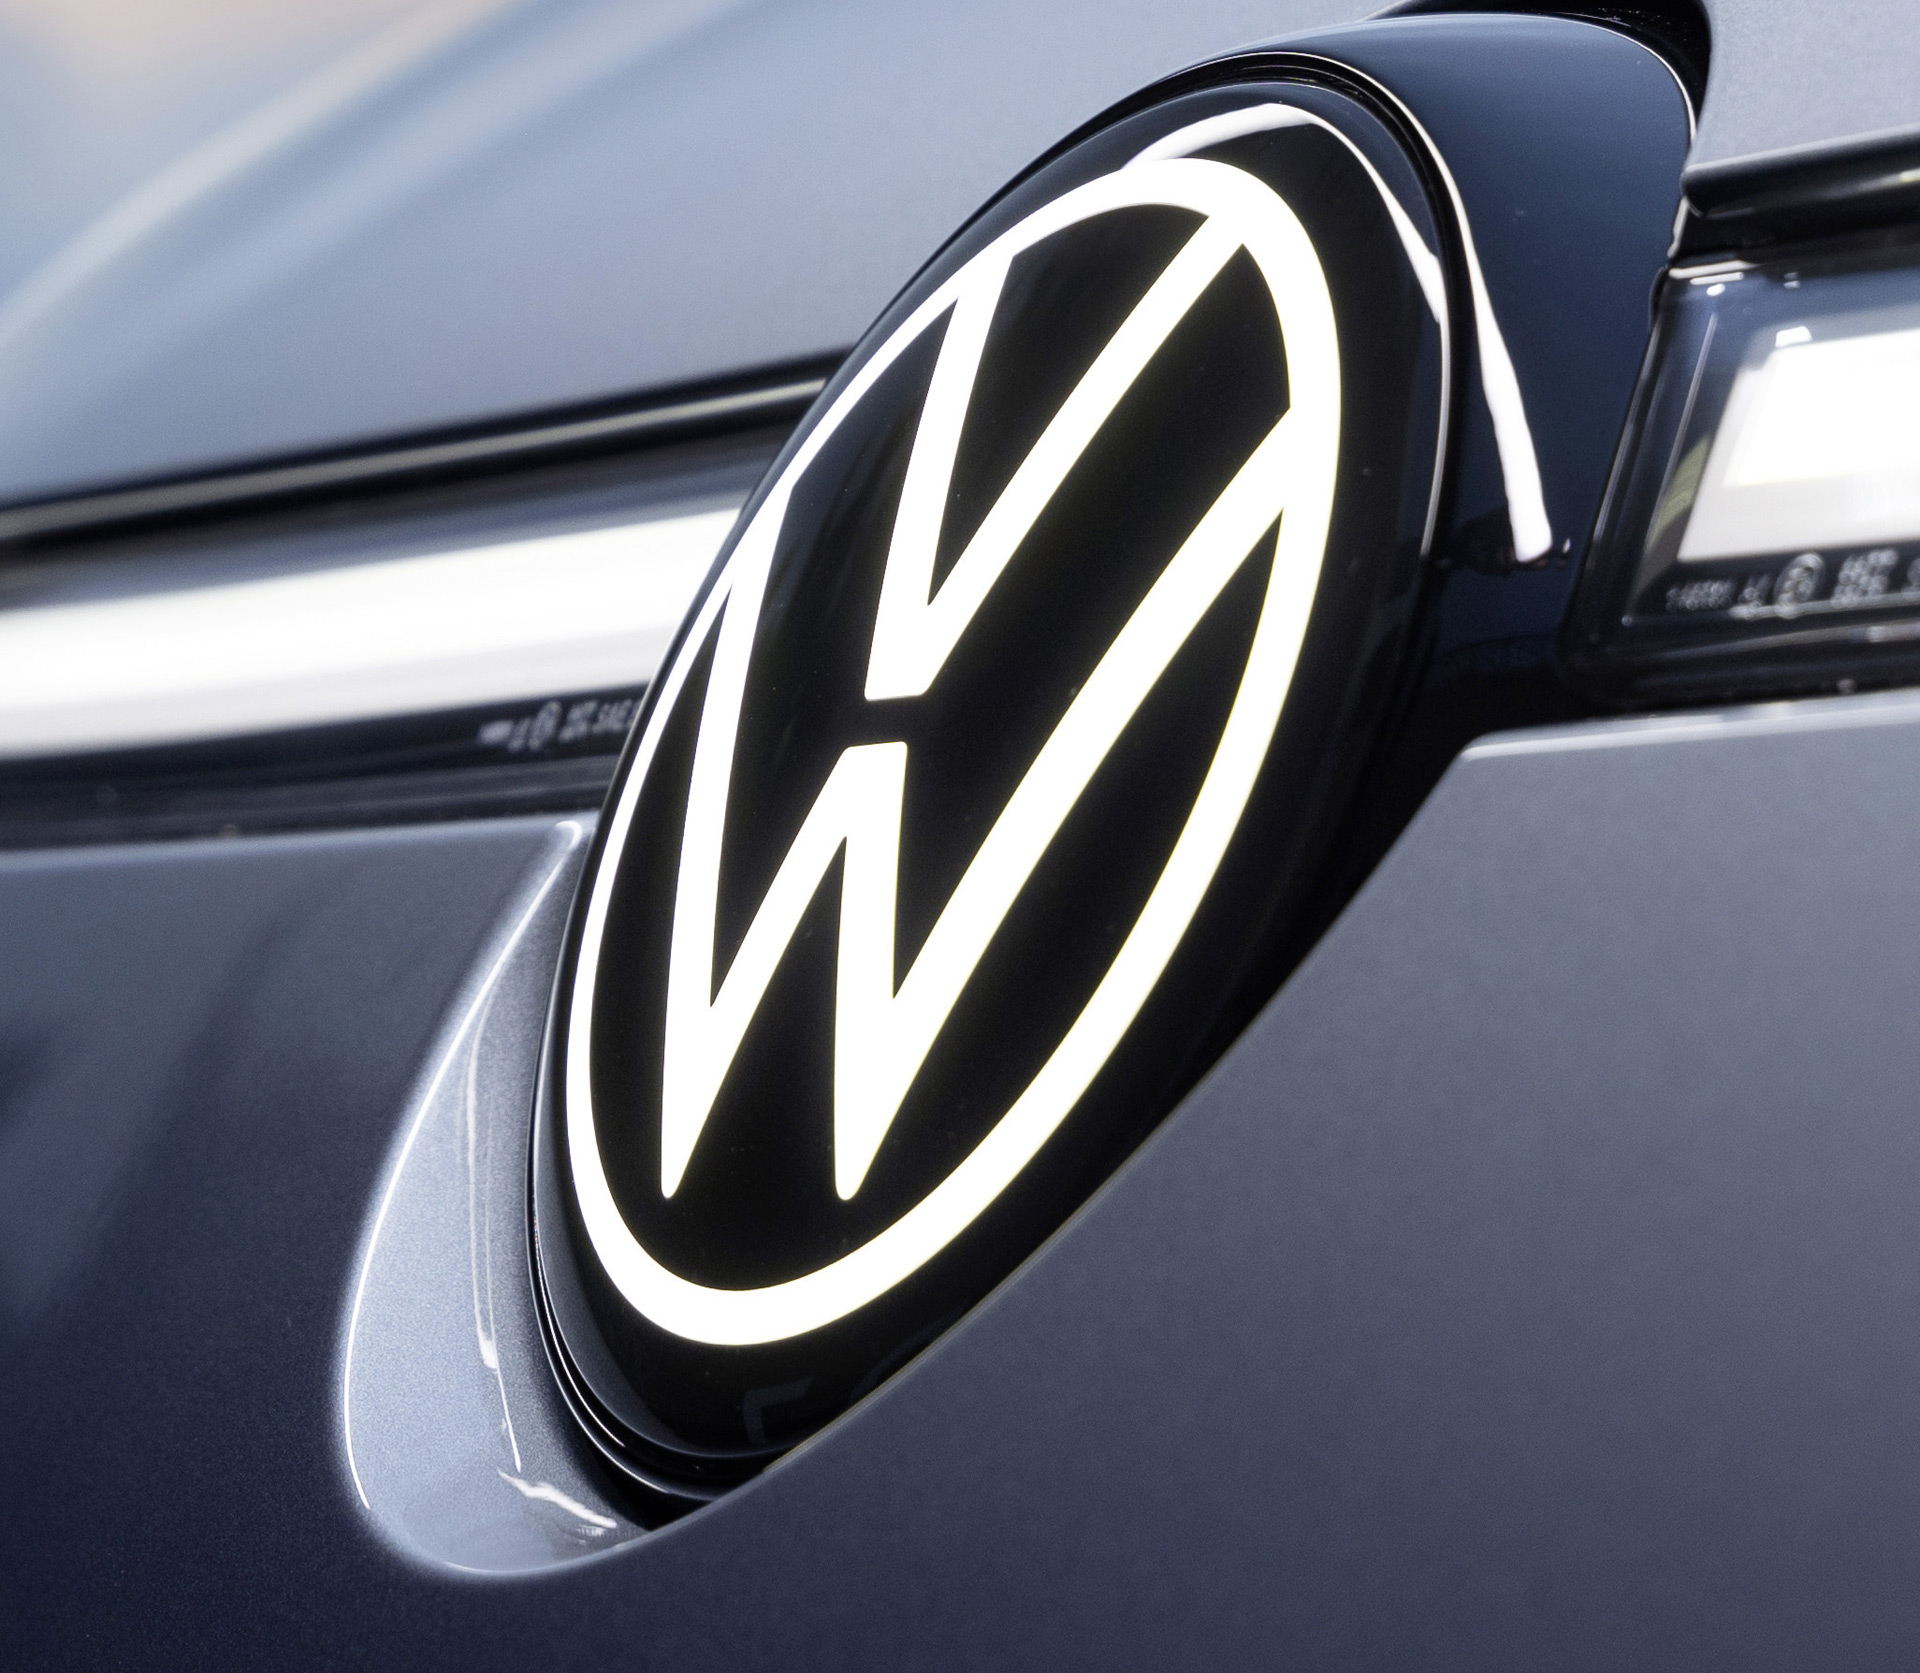 VW ID.1 due in 2027 with starting price below 20,000 euros Auto Recent